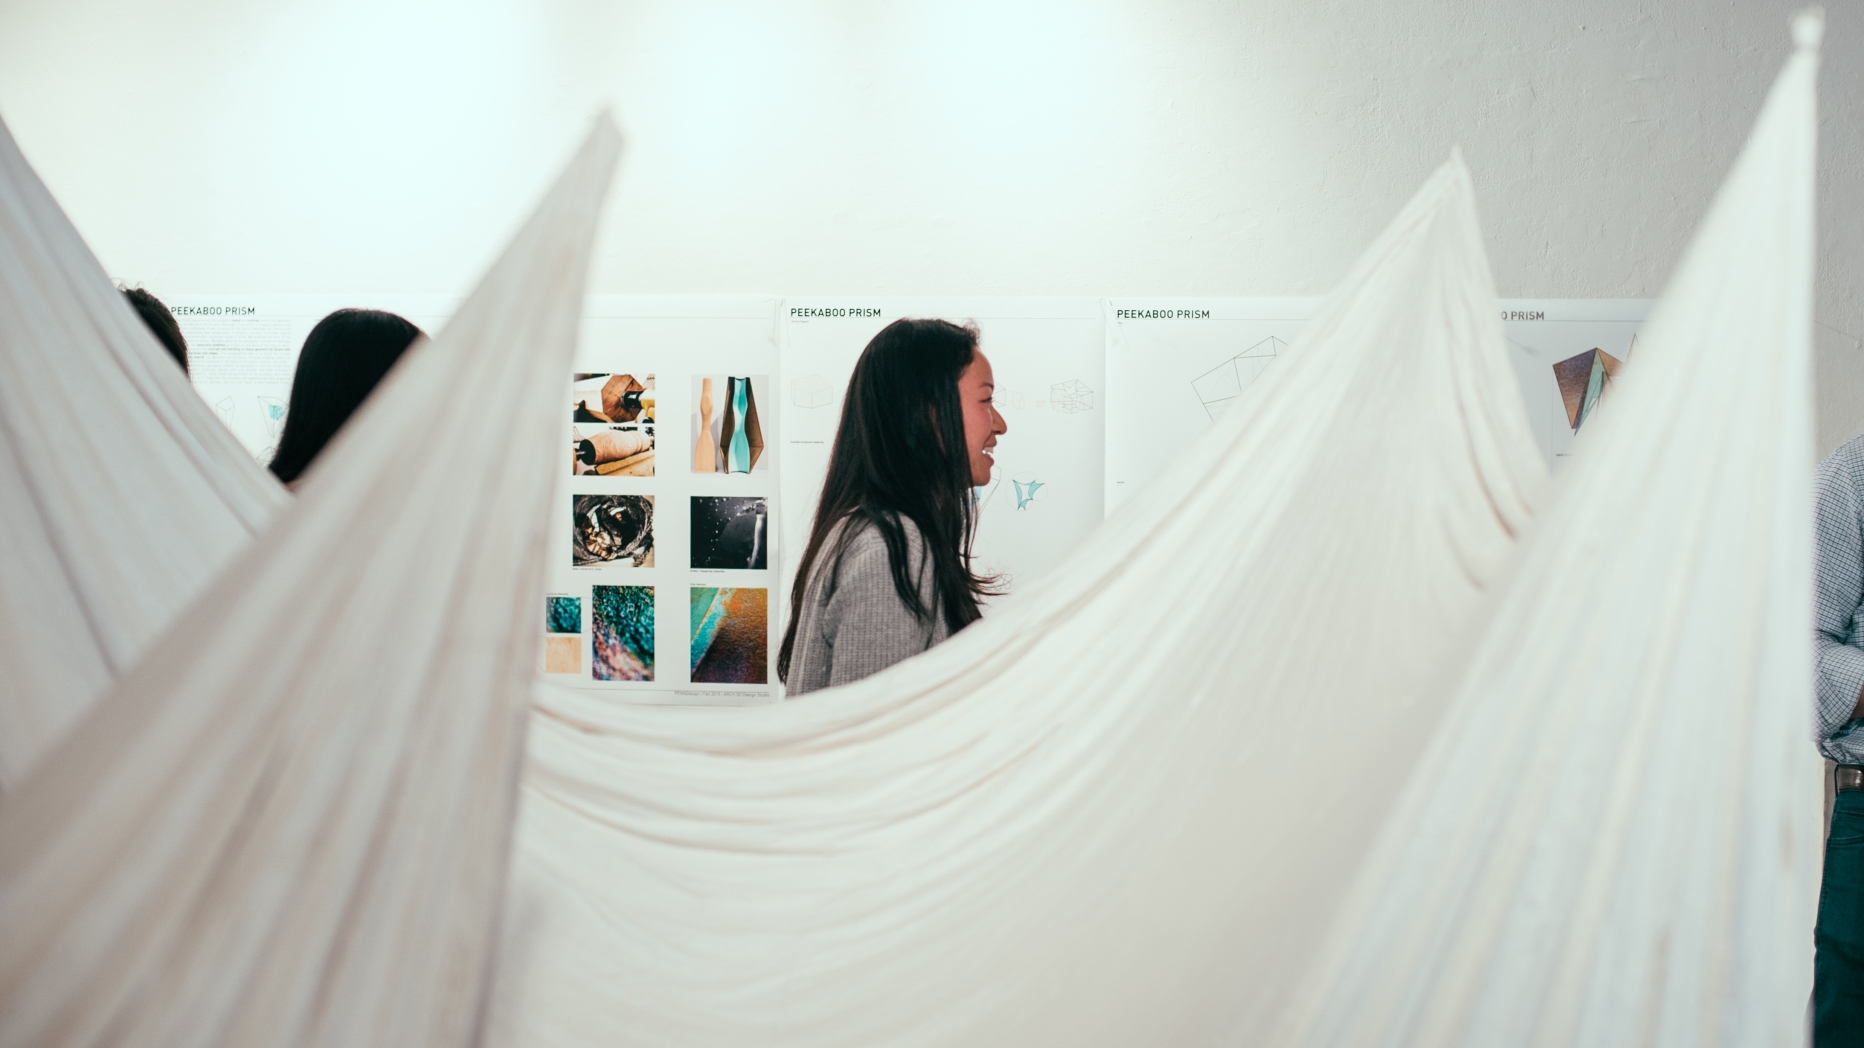 Art installation made from draped sheets with viewers walking around in the background.